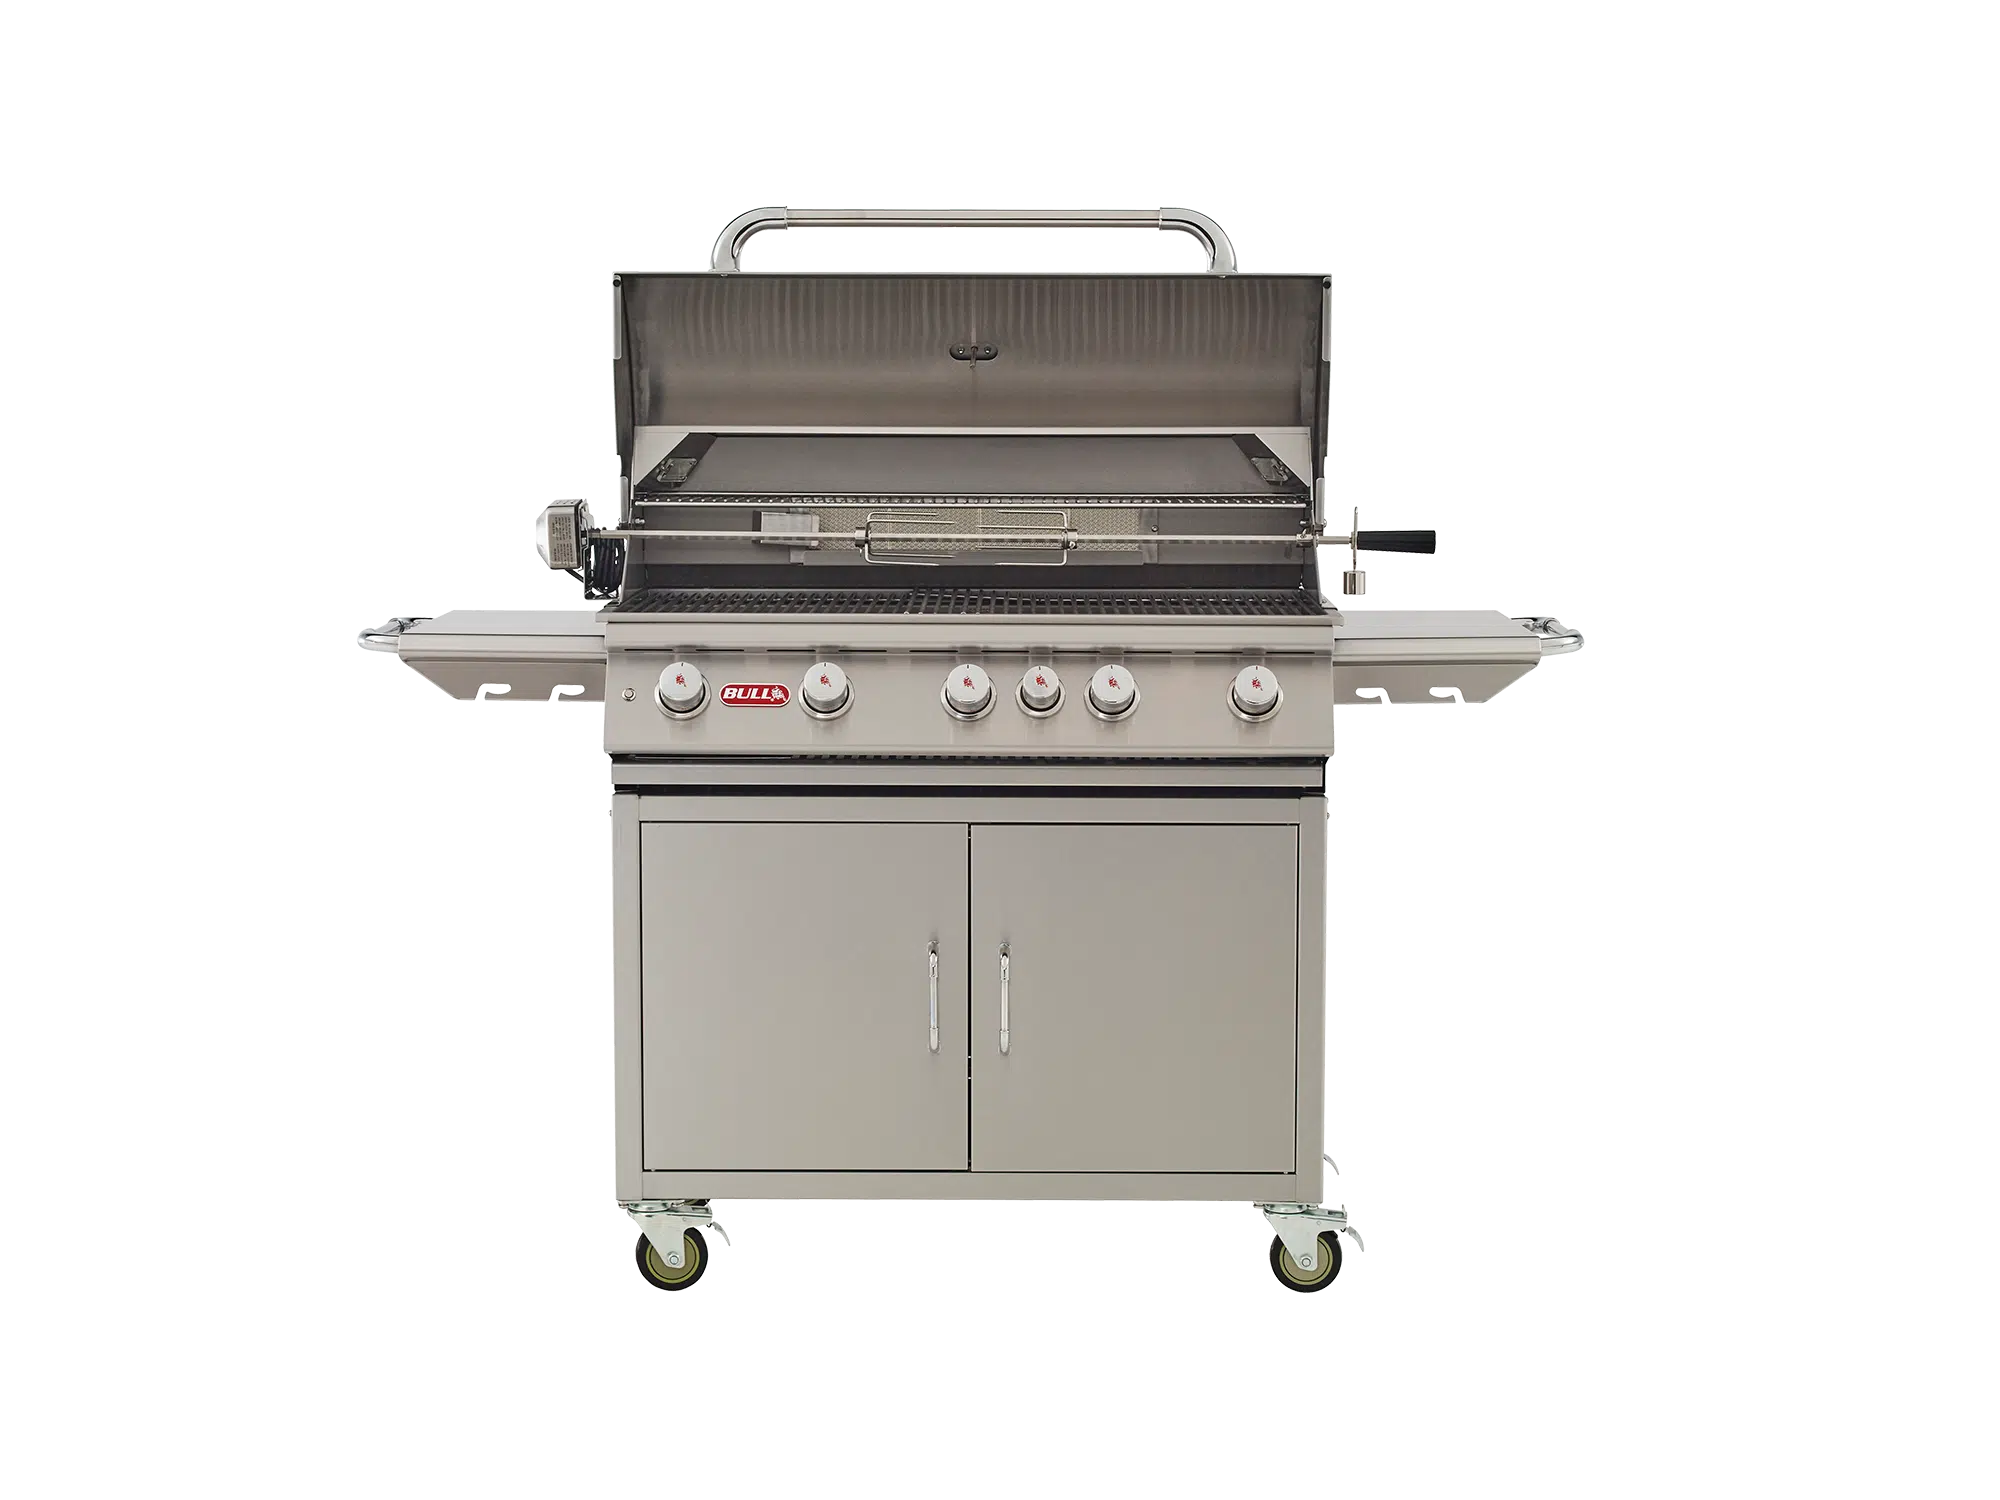 Bull BBQ Brahma Cart 5 Burner Stainless Steel Gas Barbecue 55000